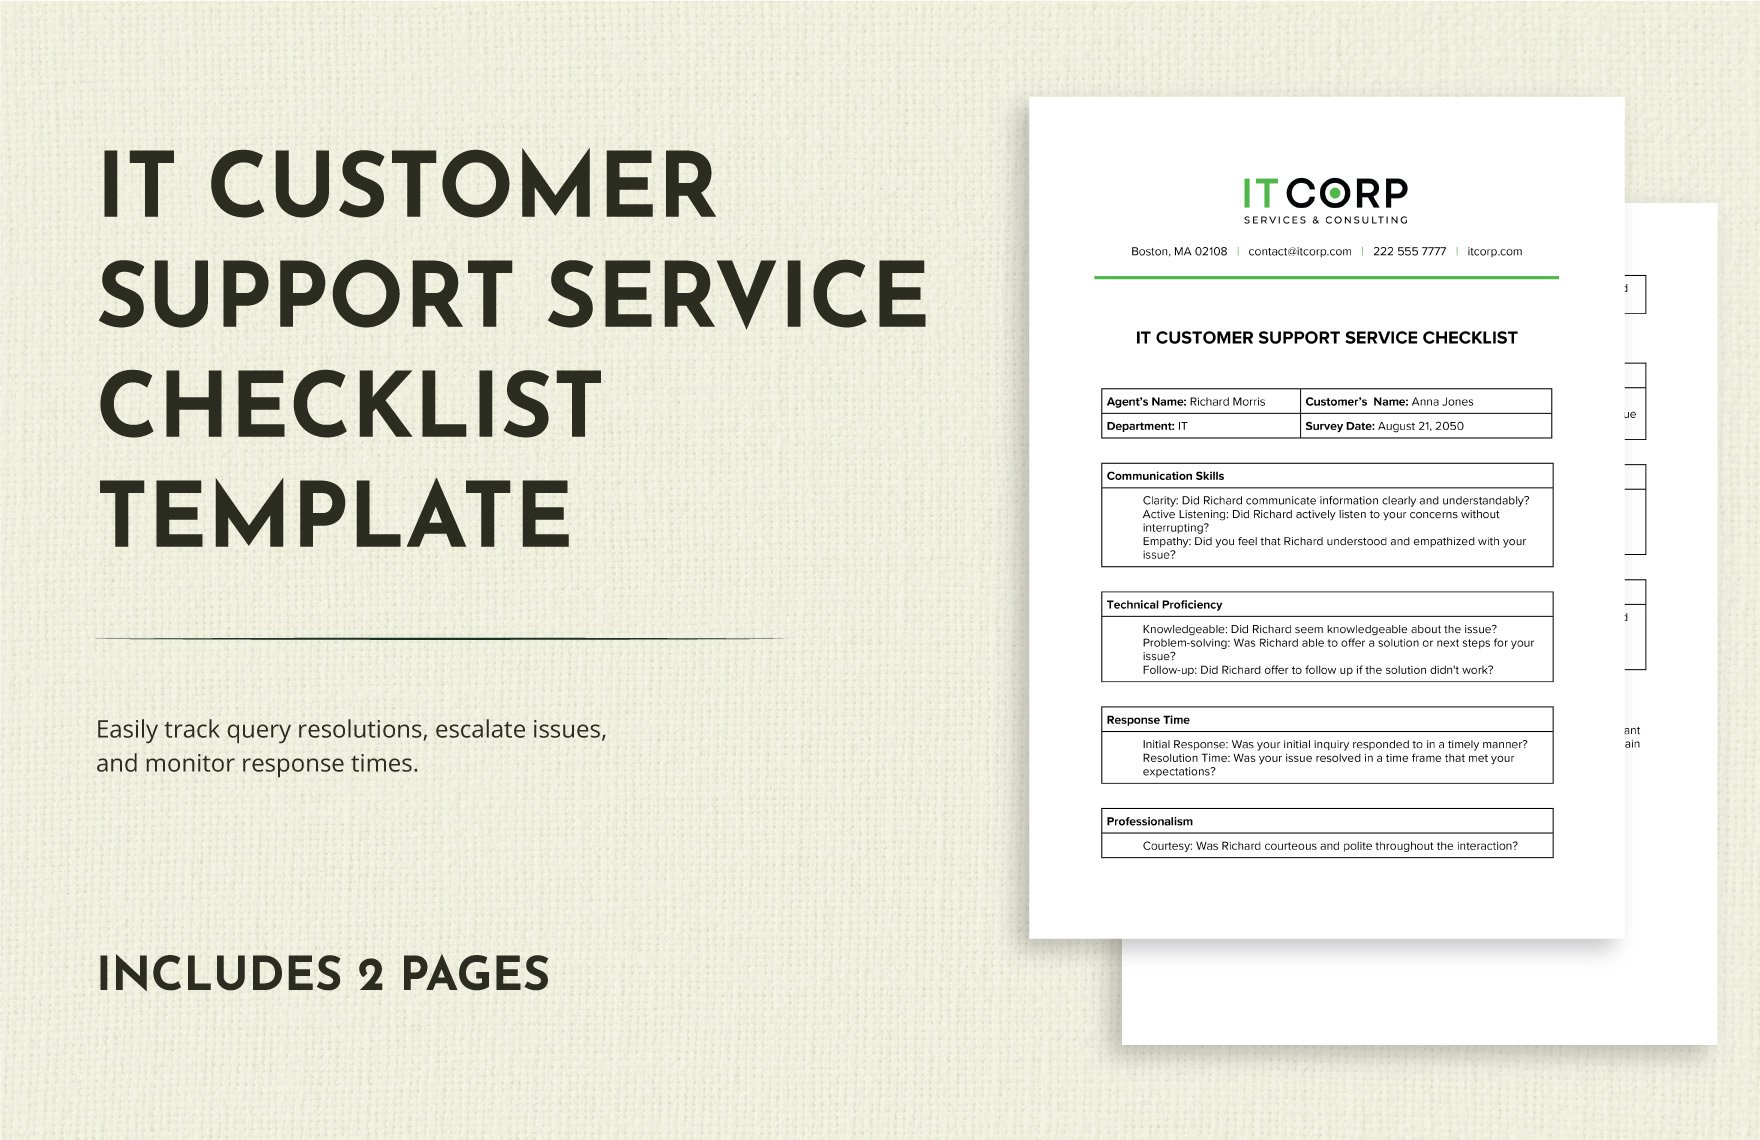 IT Customer Support Service Checklist Template in Word, Google Docs, PDF